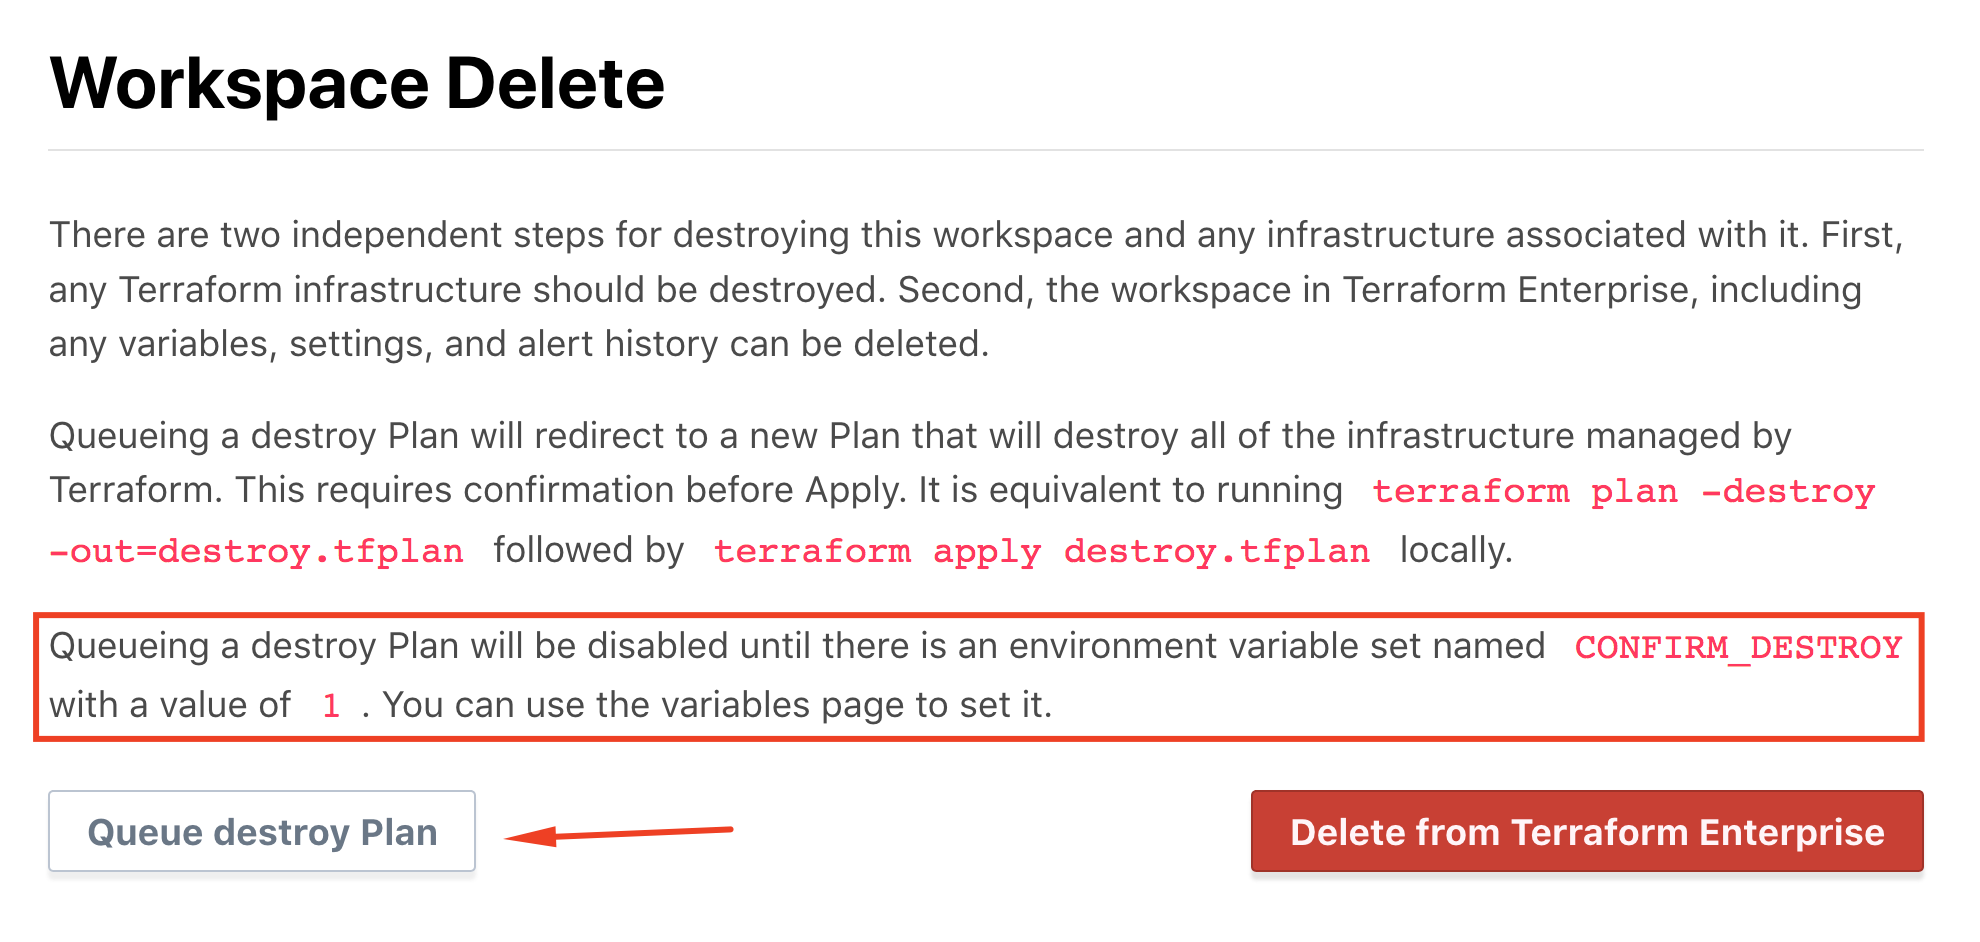 Note: You must have the environment variable 
<code>CONFIRM_DESTROY</code>
 set to 1 to have the 
<em>Queue destroy Plan</em>
 button clickable.